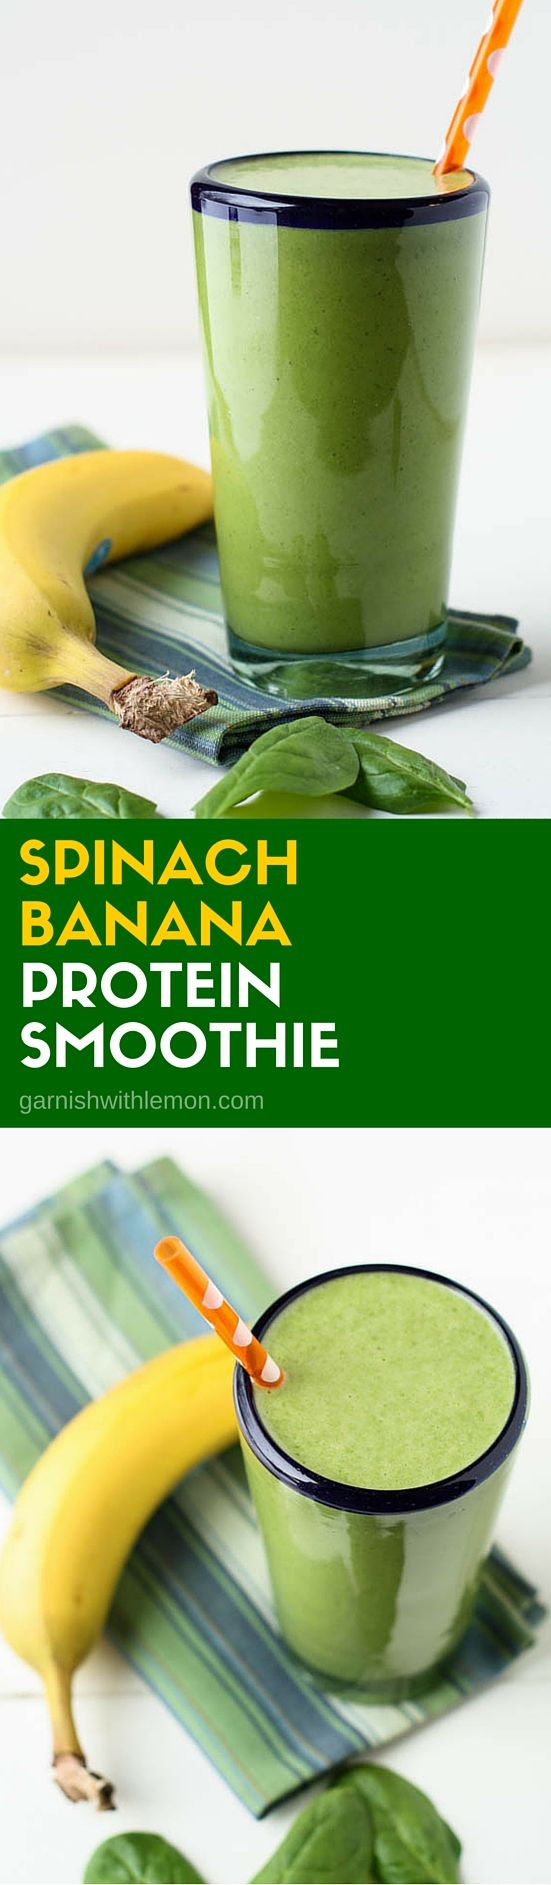 Healthy Lunch Smoothies
 Spinach Banana Protein Smoothie Recipe